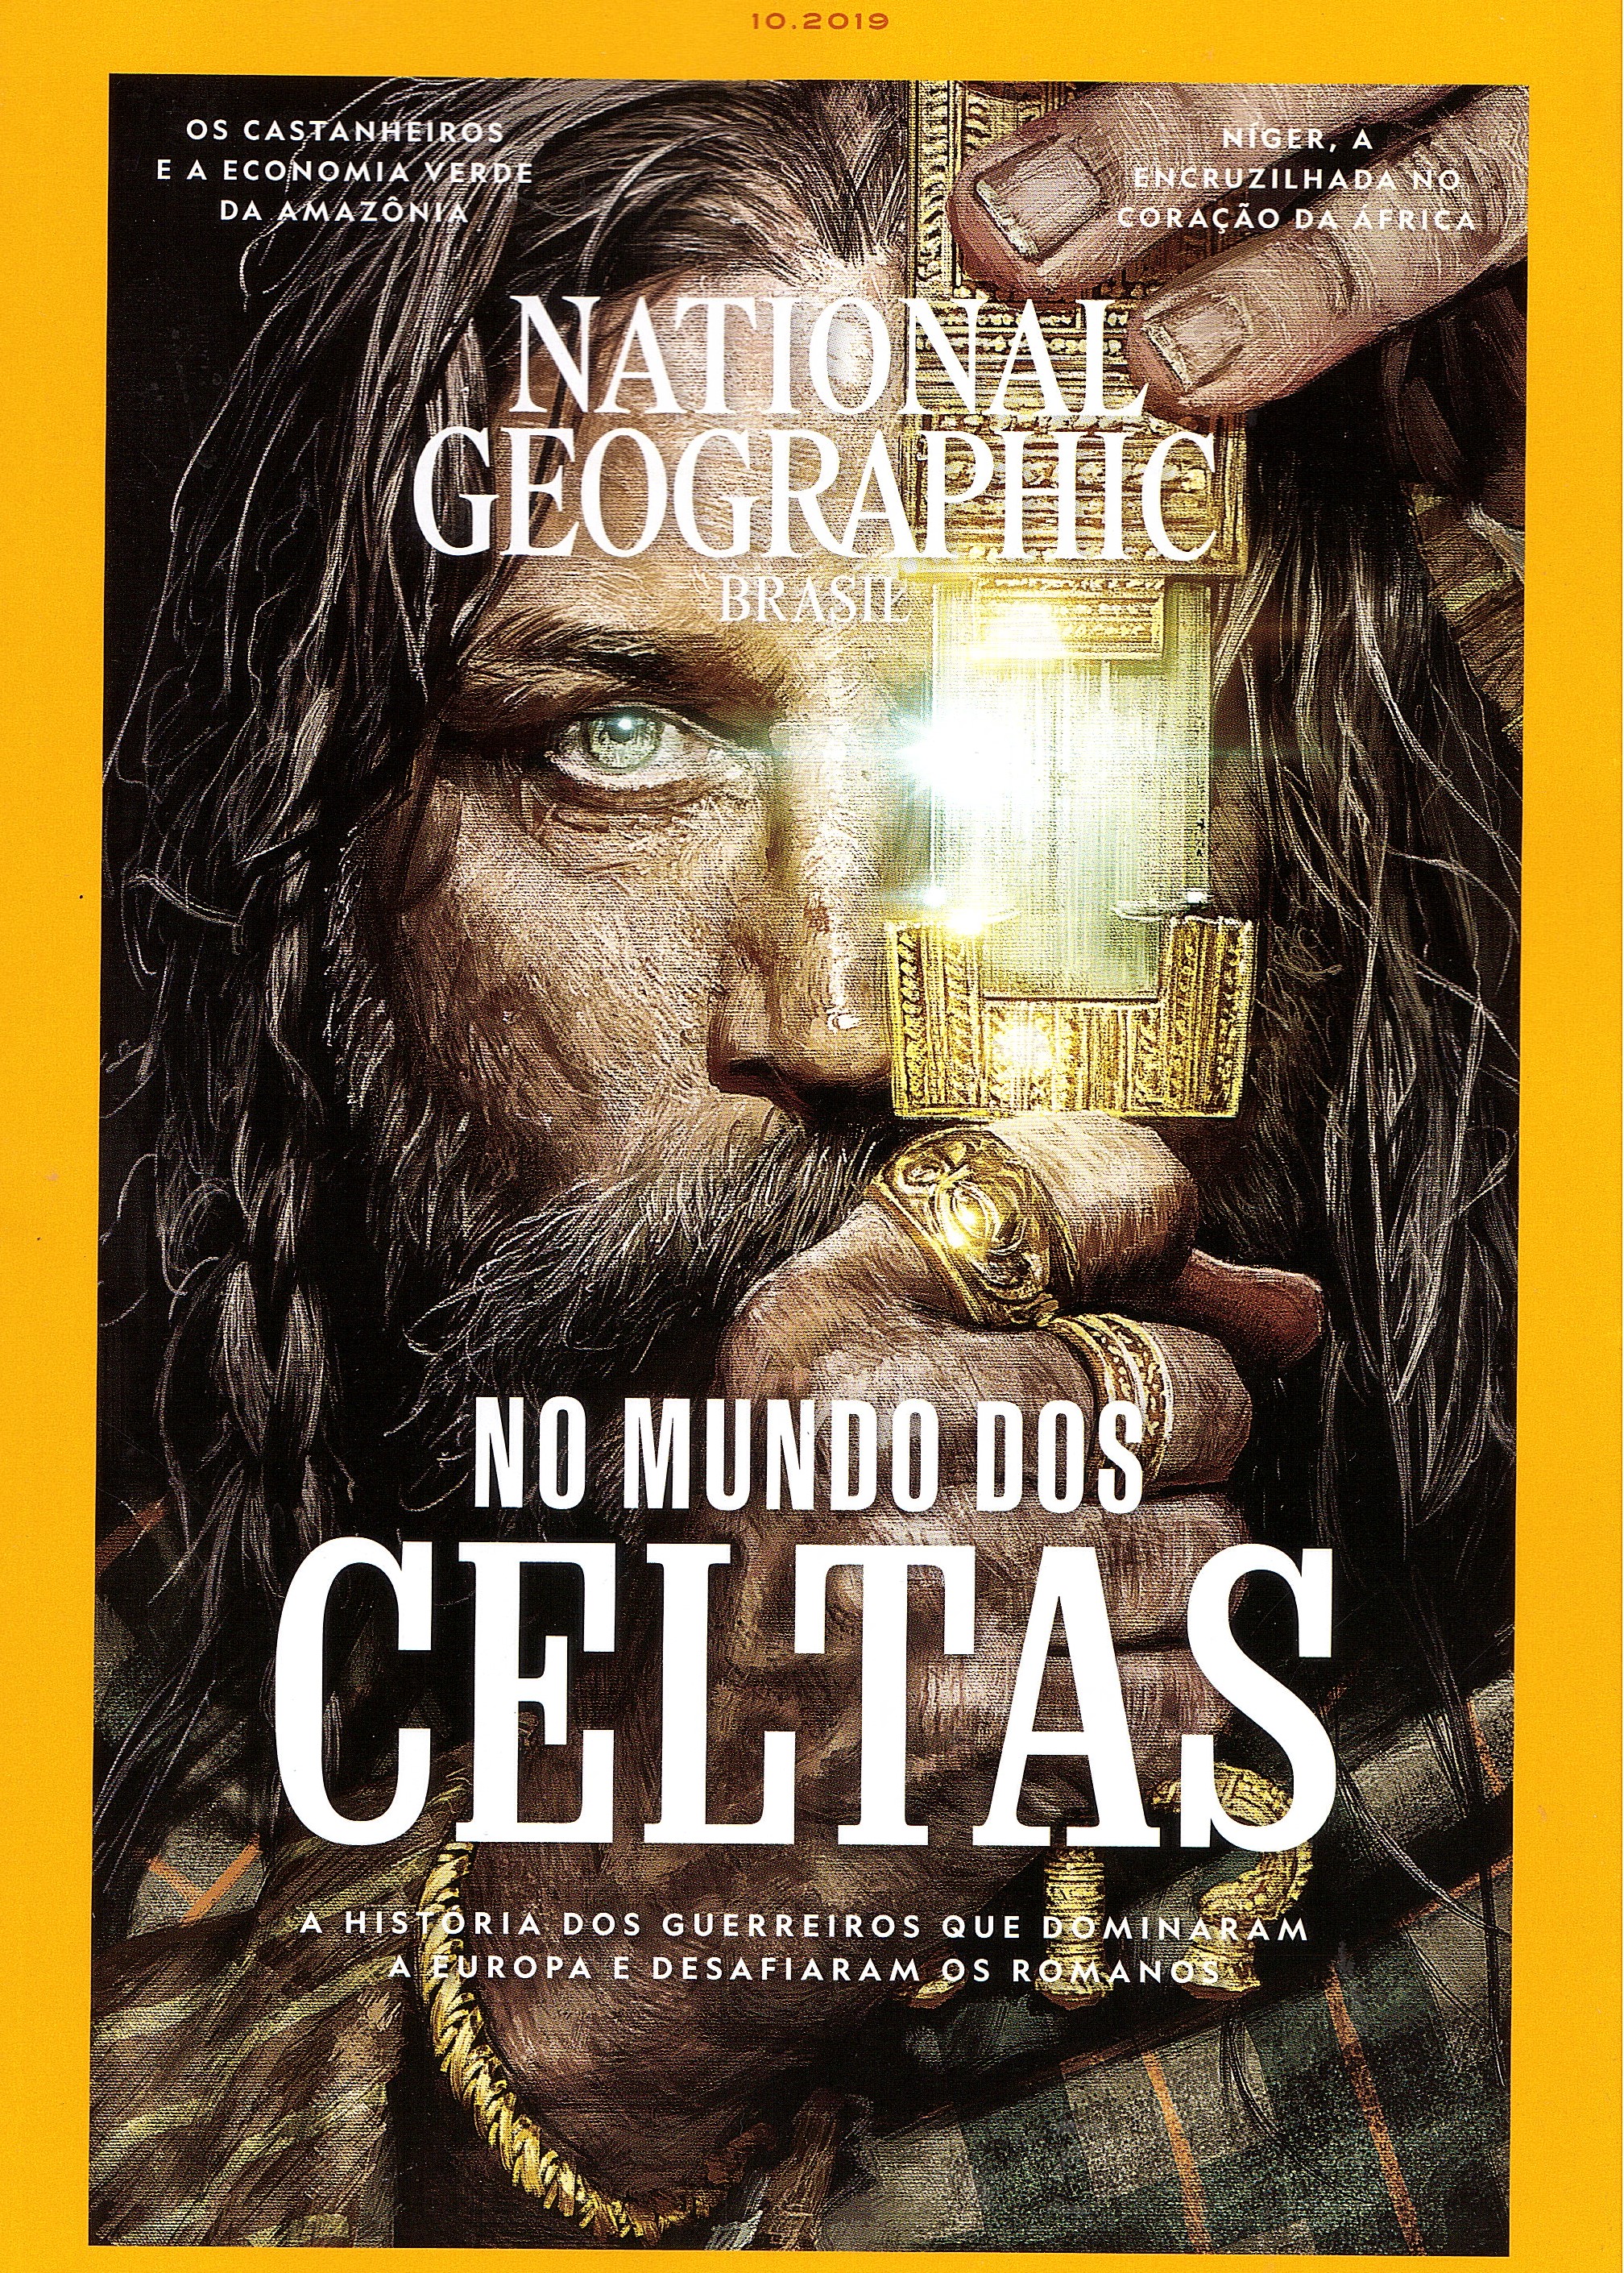 National geographic out 19